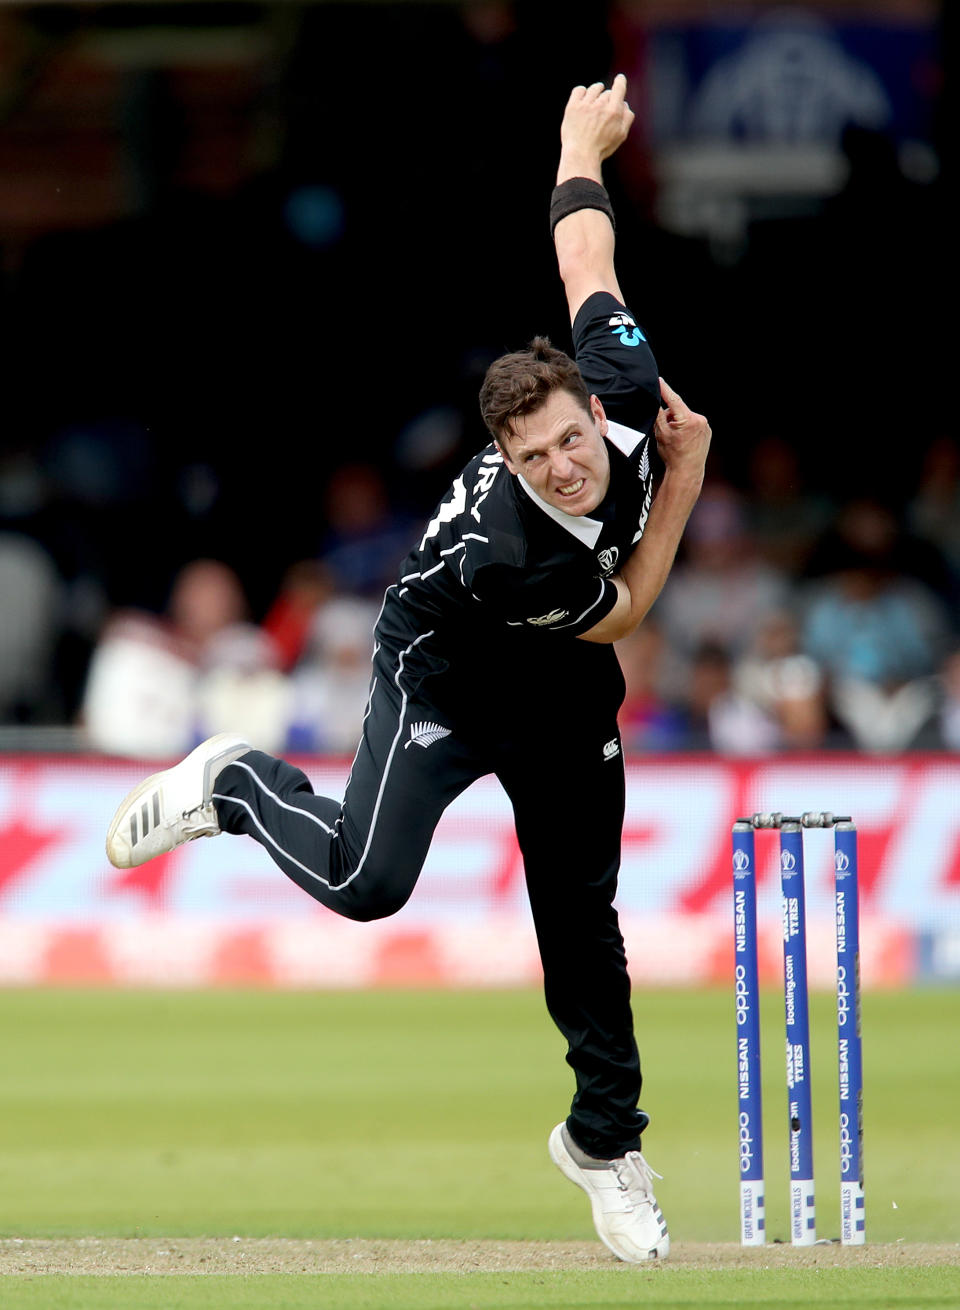 New Zealand's Matt Henry bowls during the ICC World Cup Final at Lord's, London.